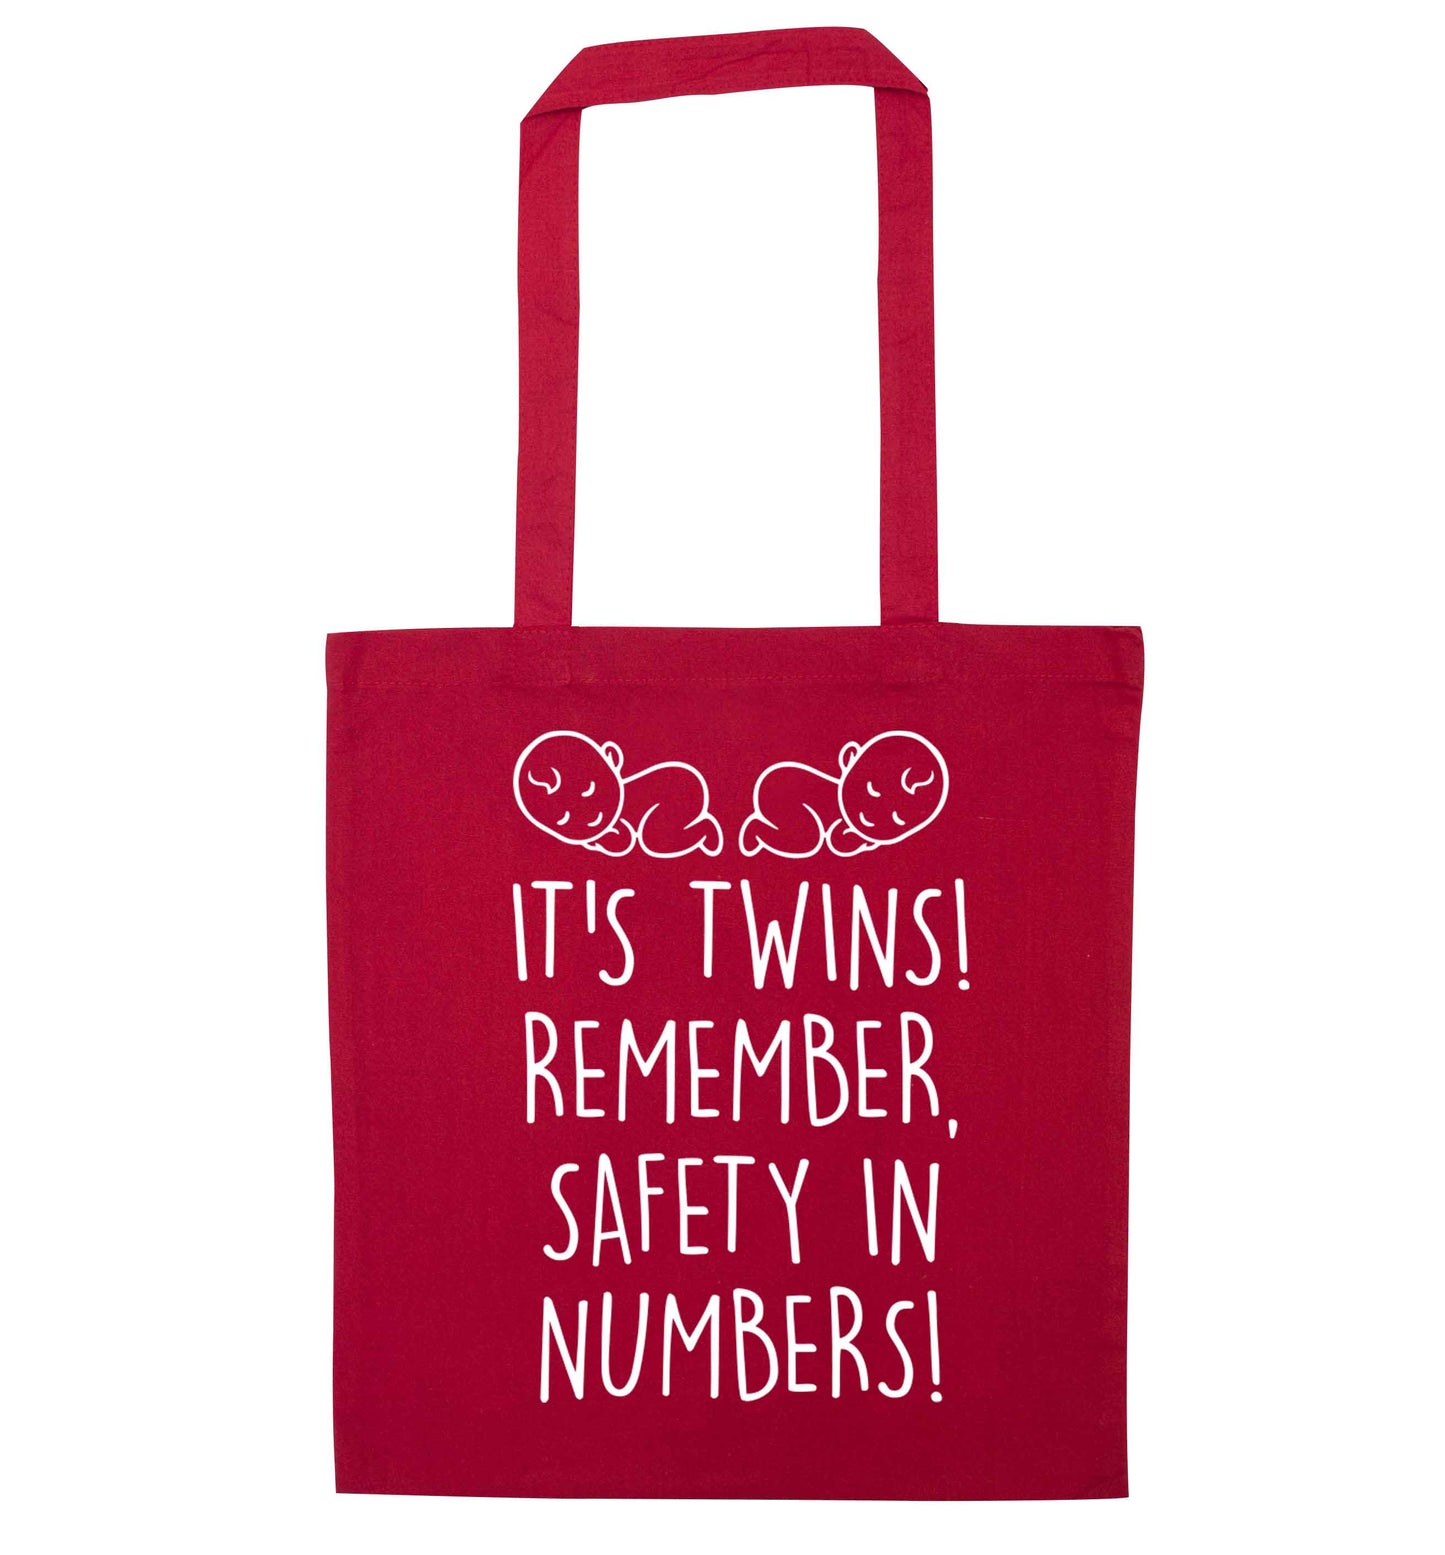 It's twins! Remember safety in numbers! red tote bag